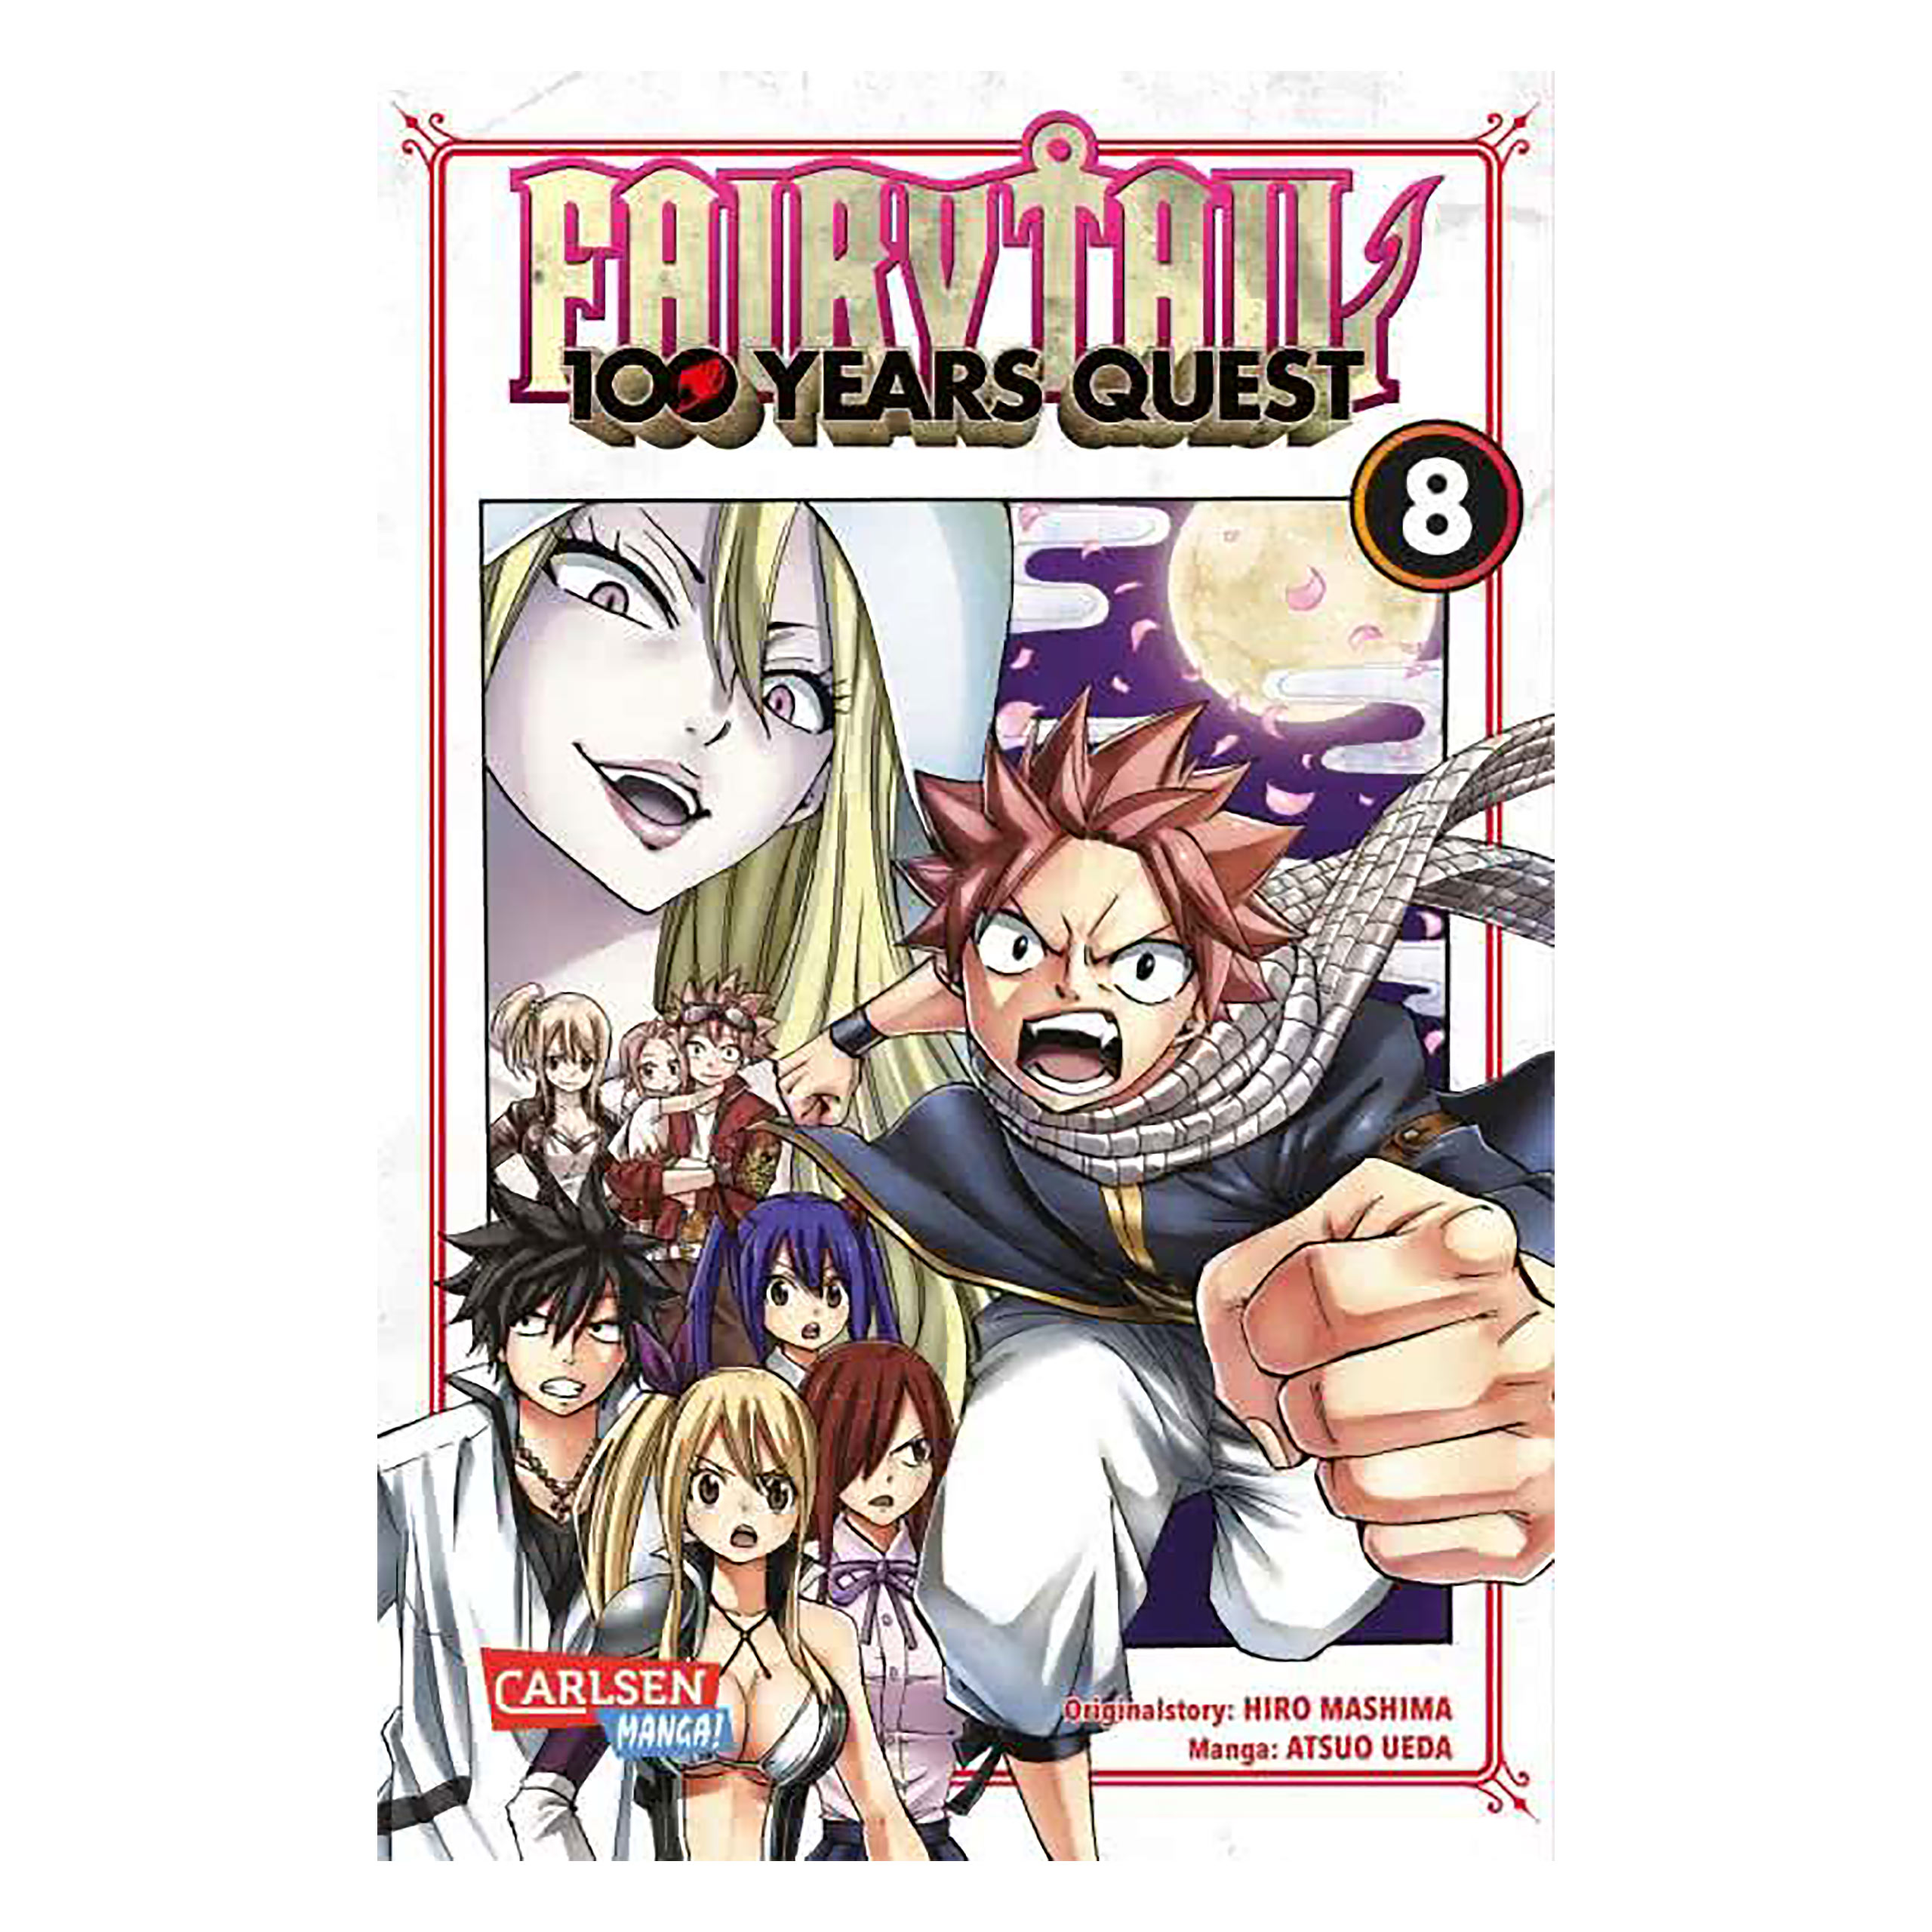 Fairy Tail - 100 Years Quest Volume 8 Paperback